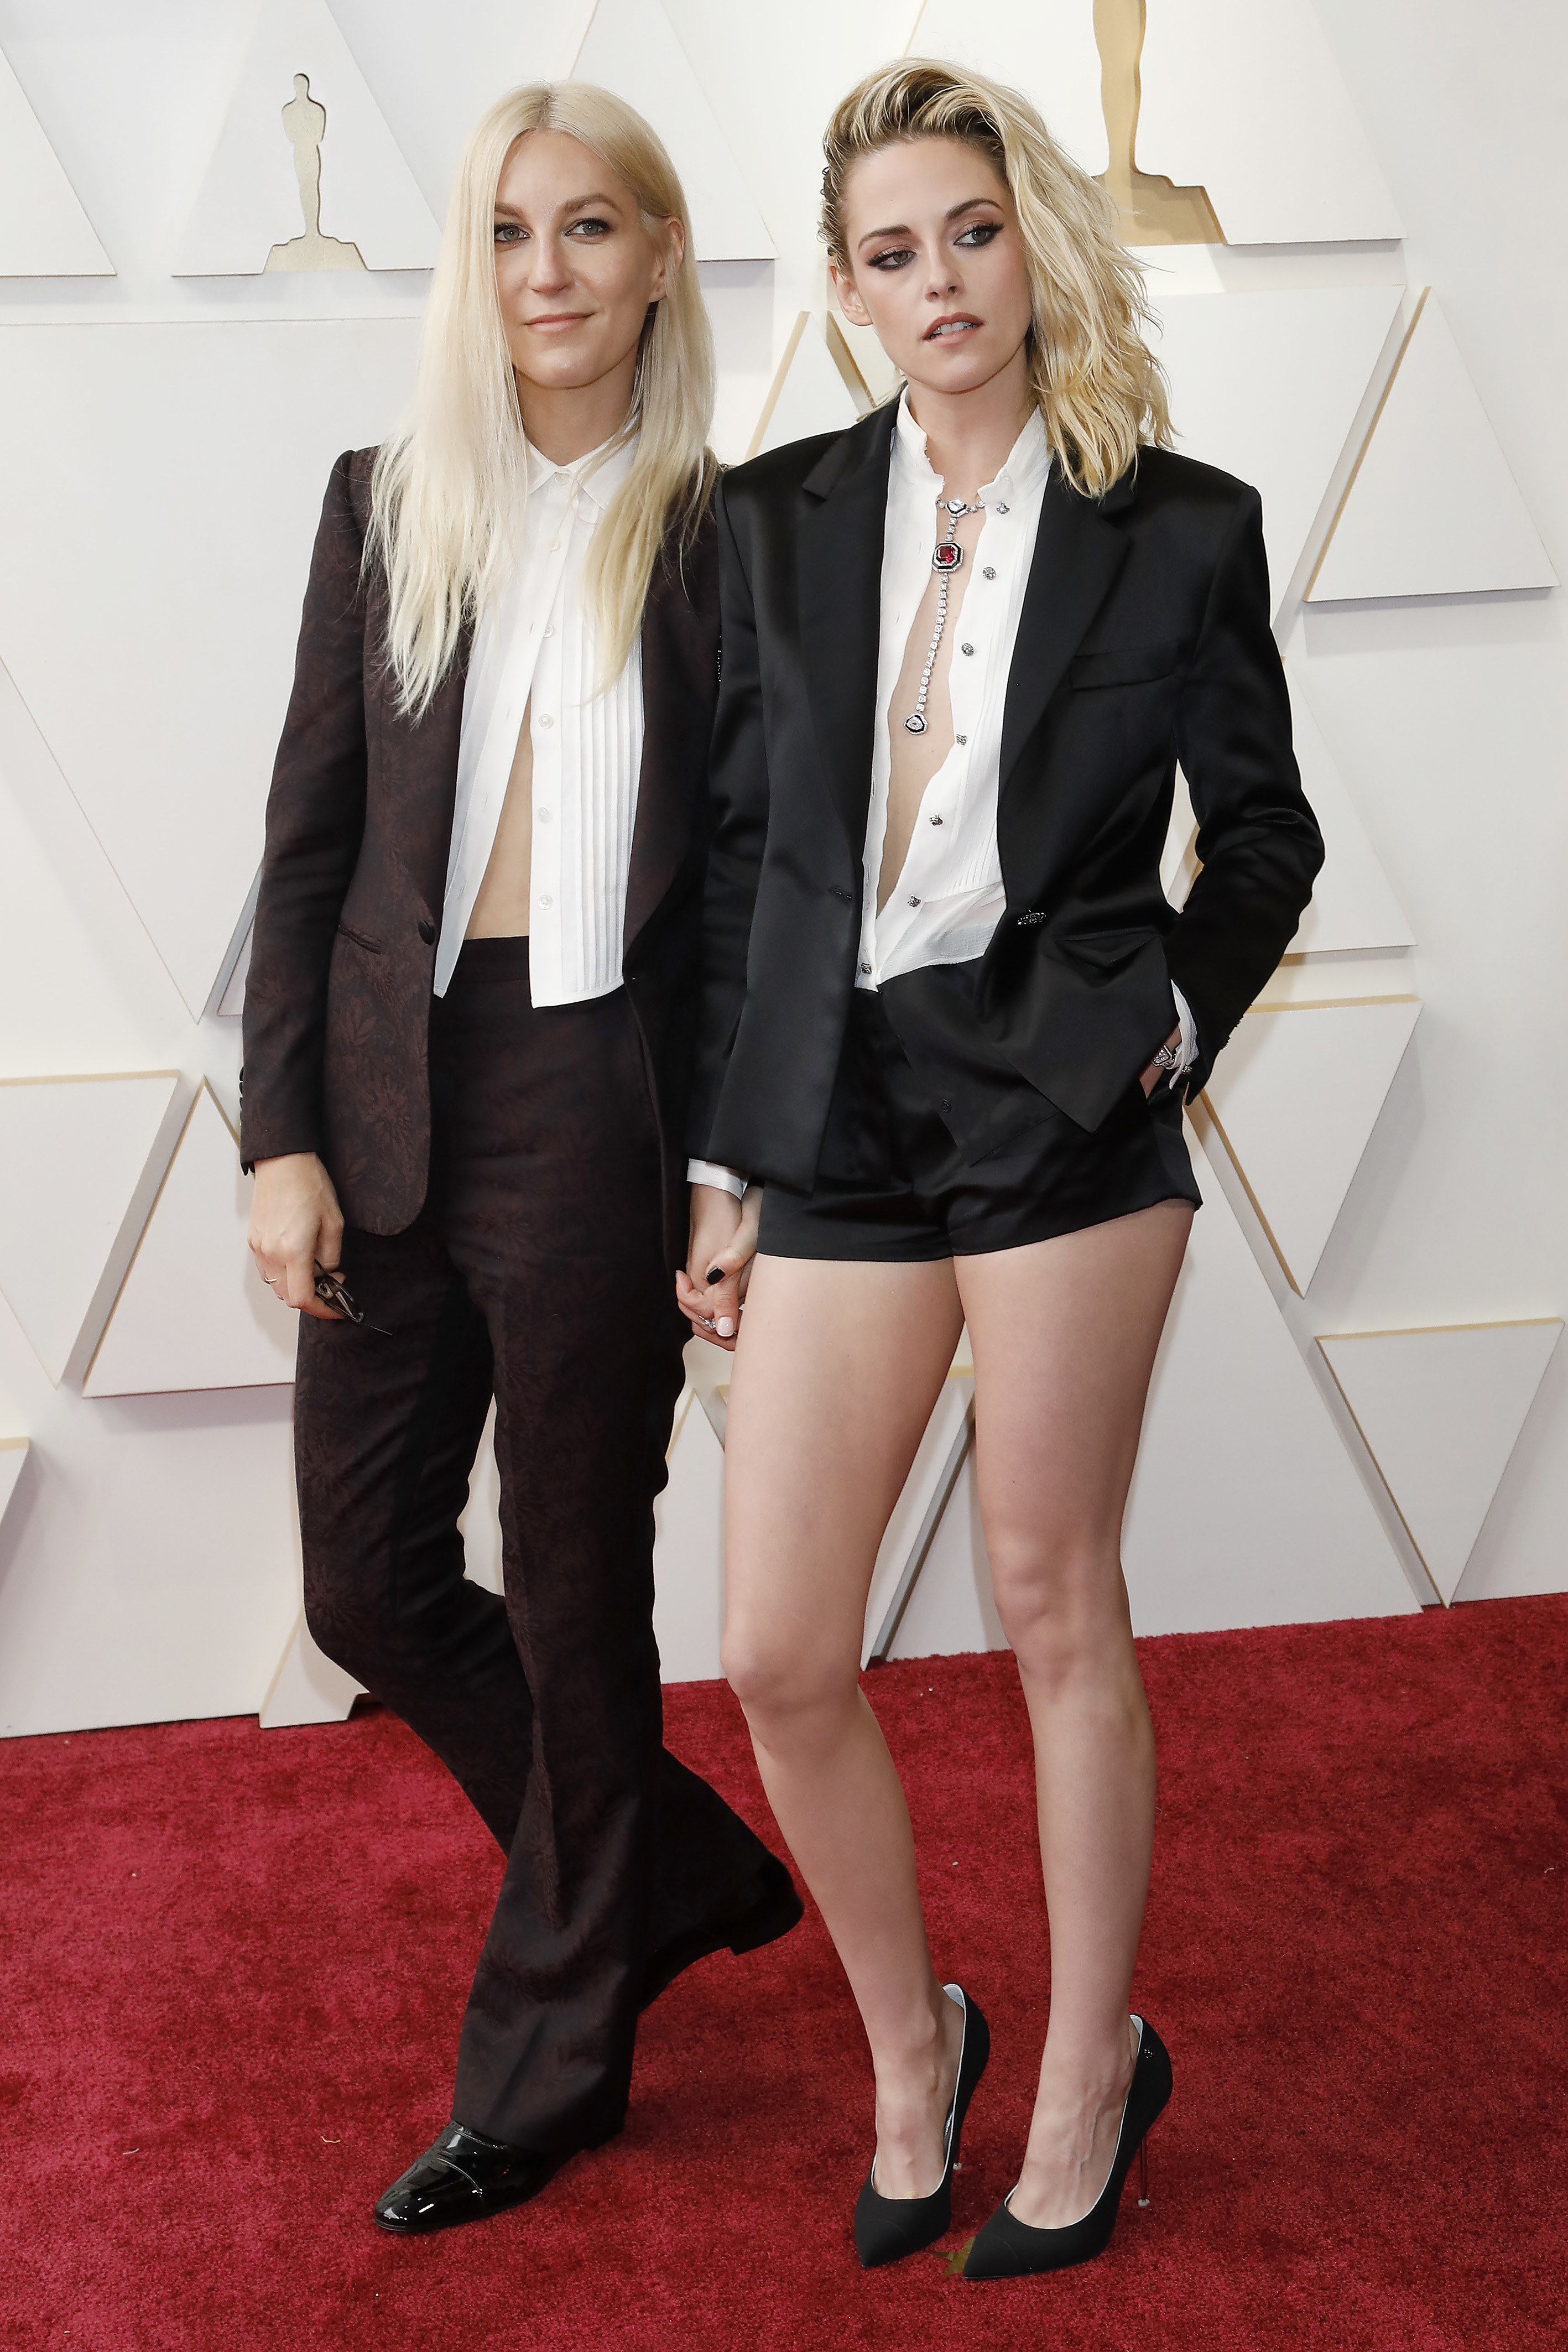 the two posing on the red carpet